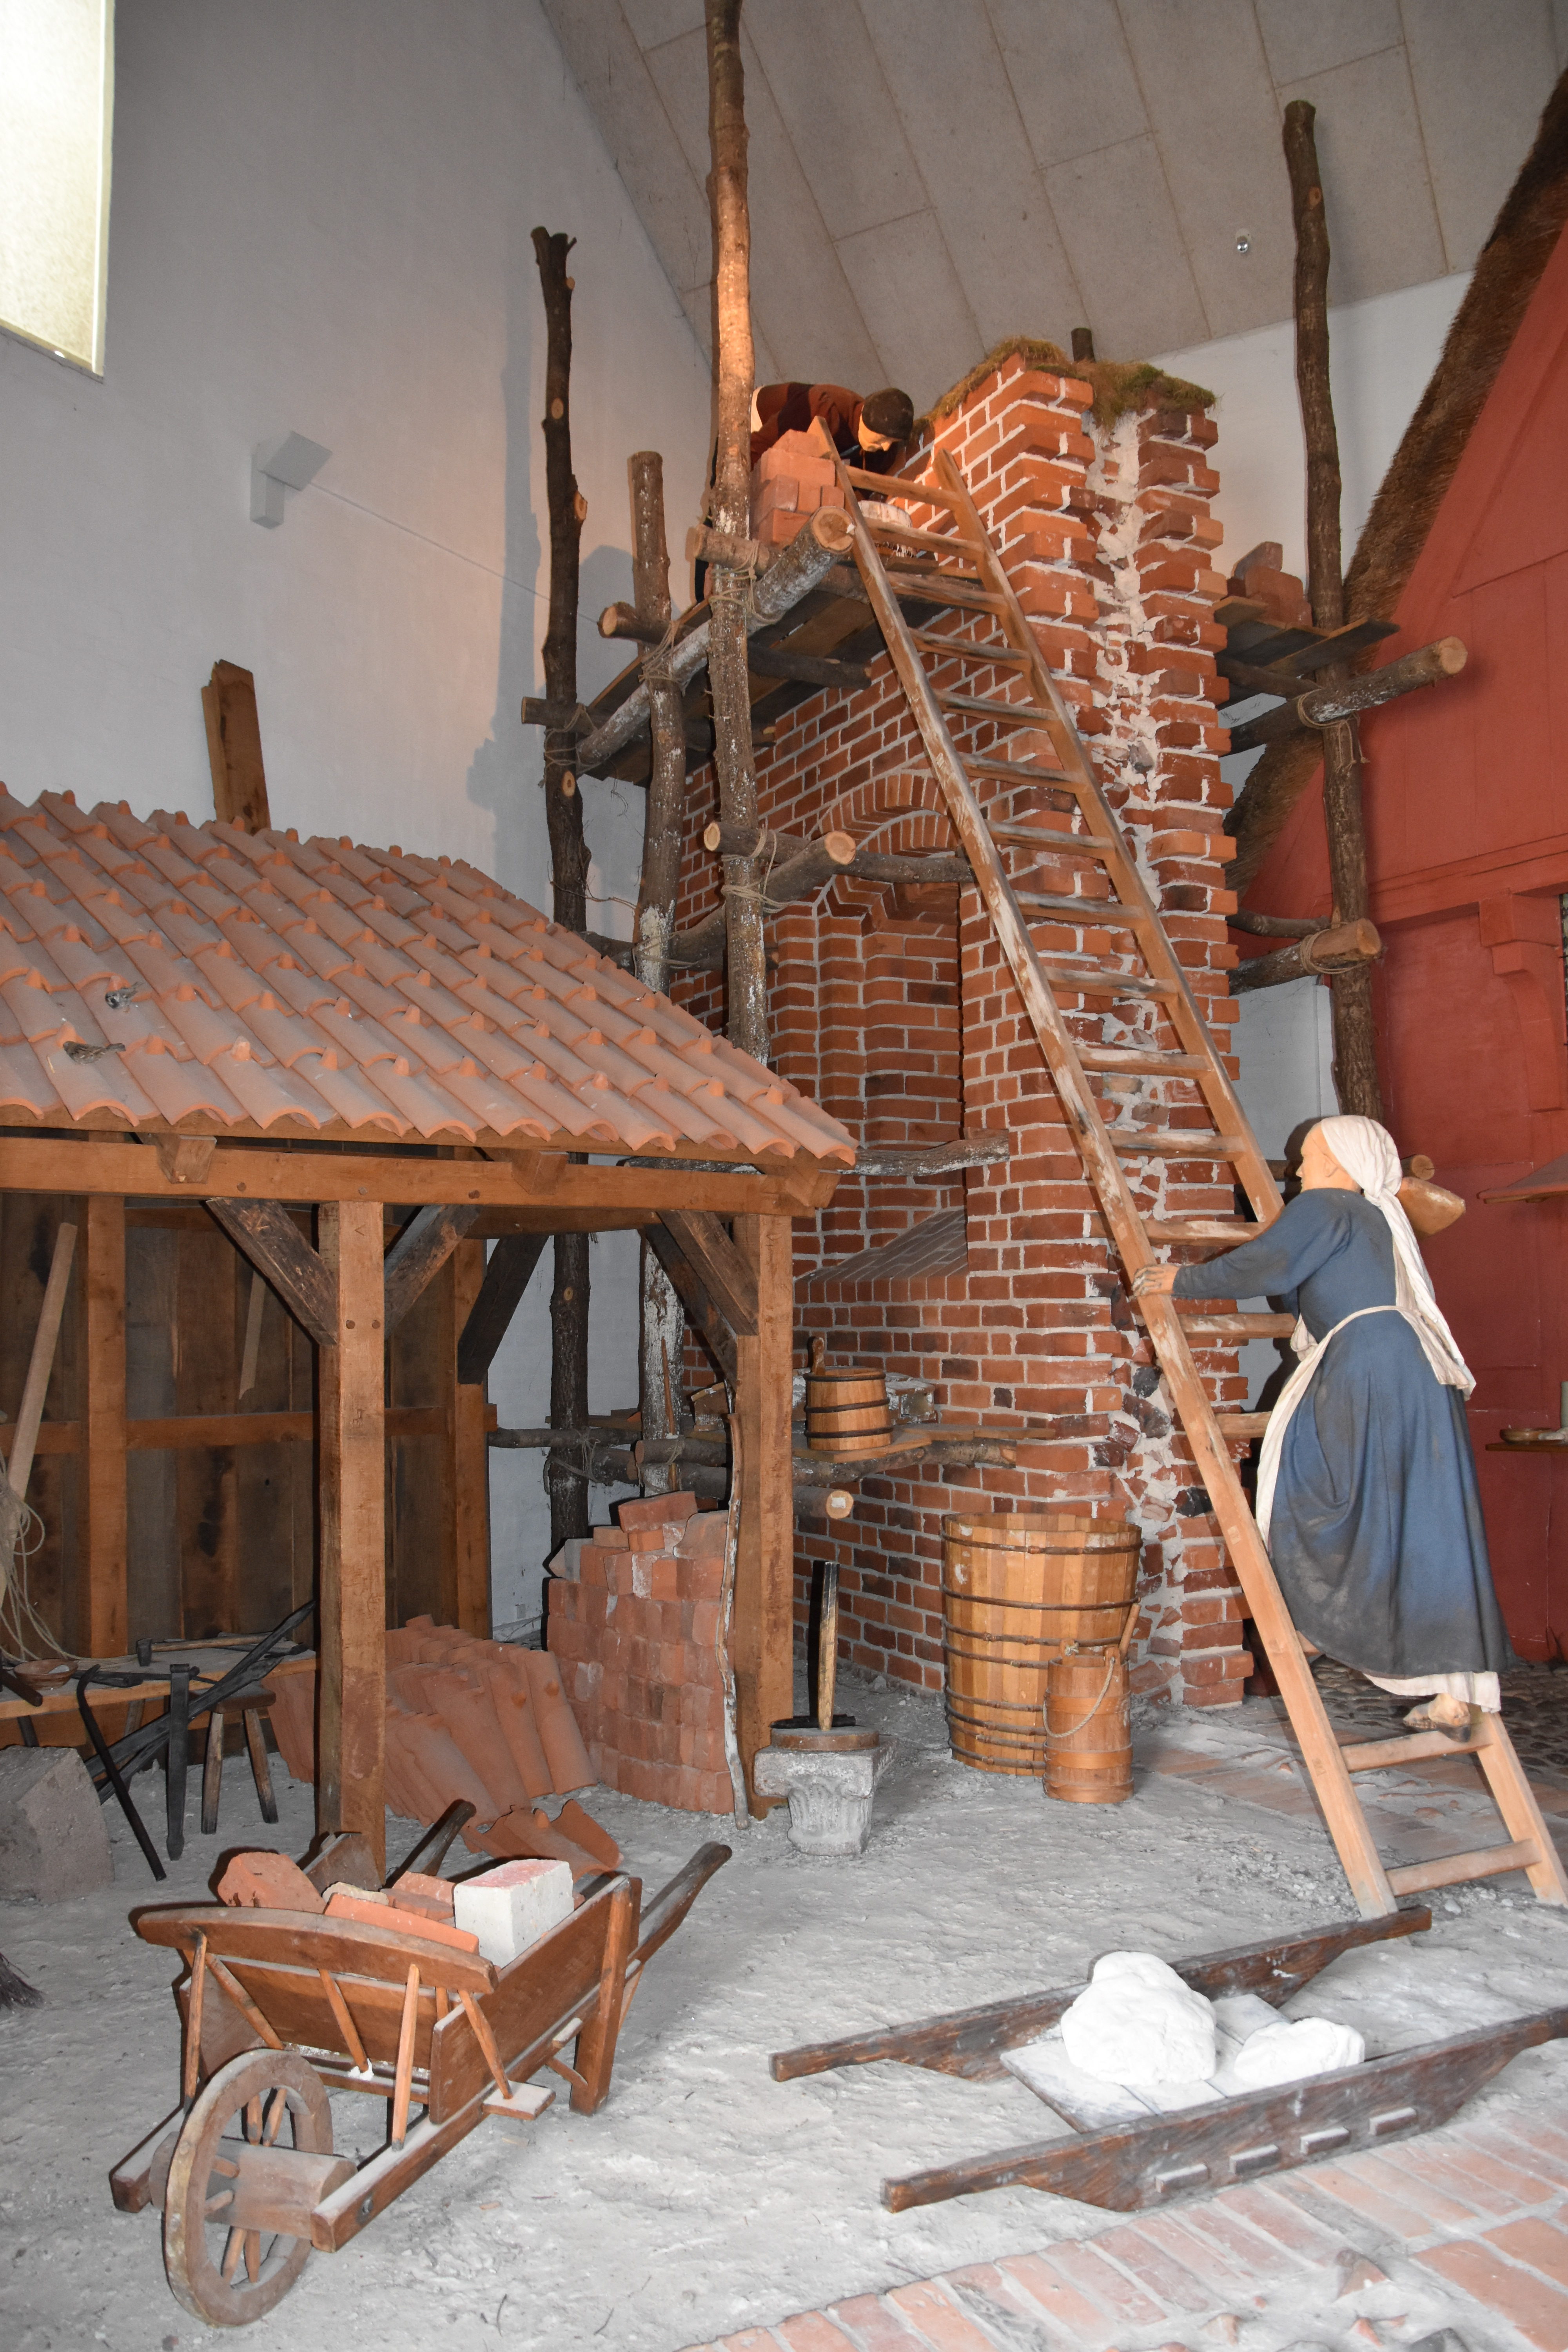 Display of Ribe in ancient times at the Ribe Viking Museum in Ribe, Denmark